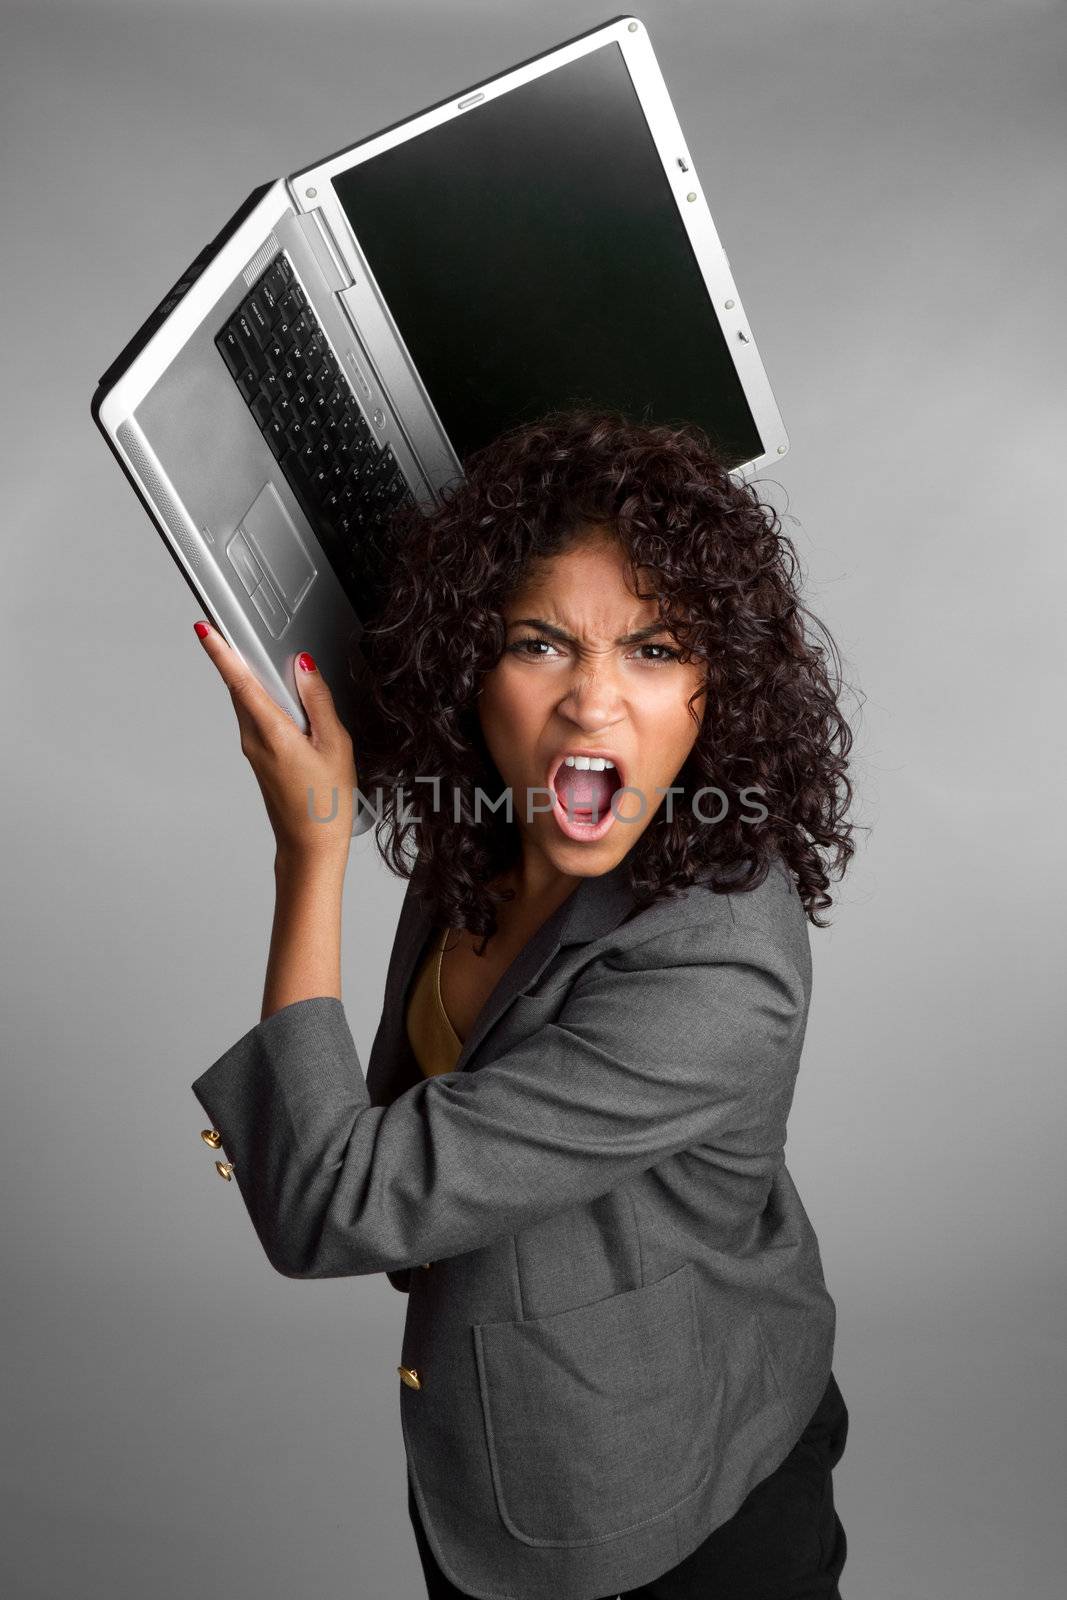 Angry Laptop Woman by keeweeboy